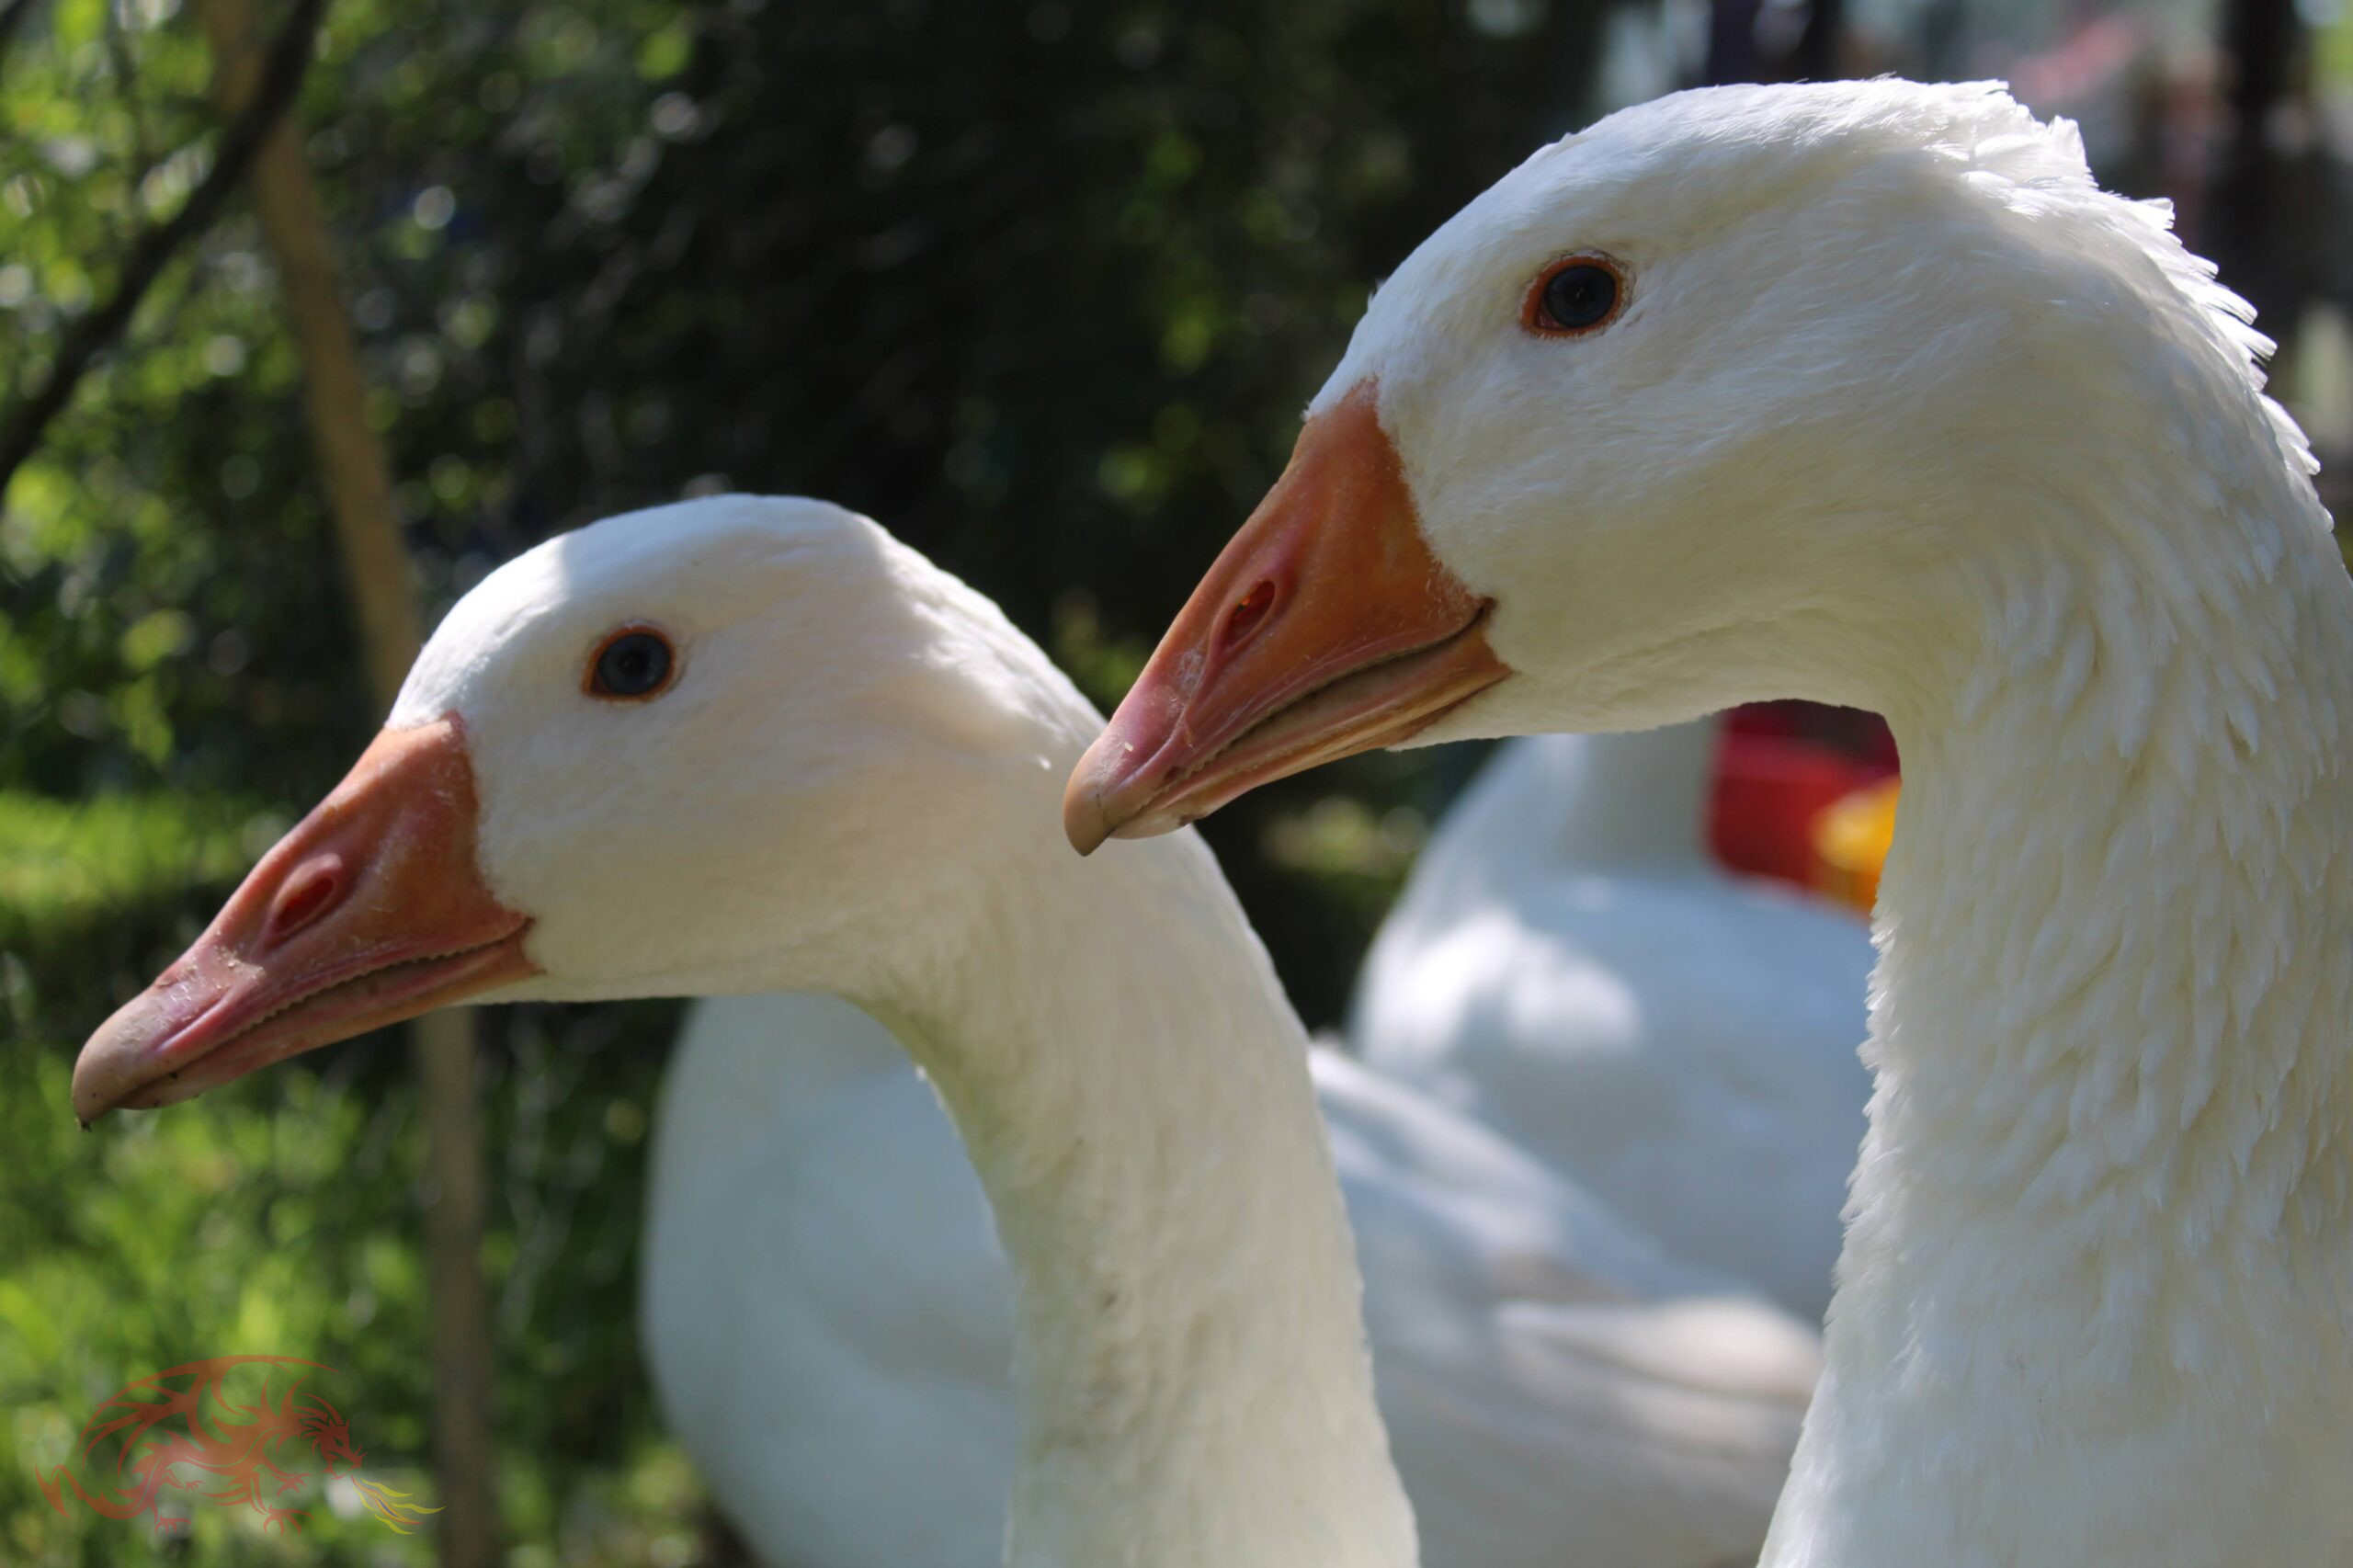 Welsh Government announces new measures to keep avian influenza at bay